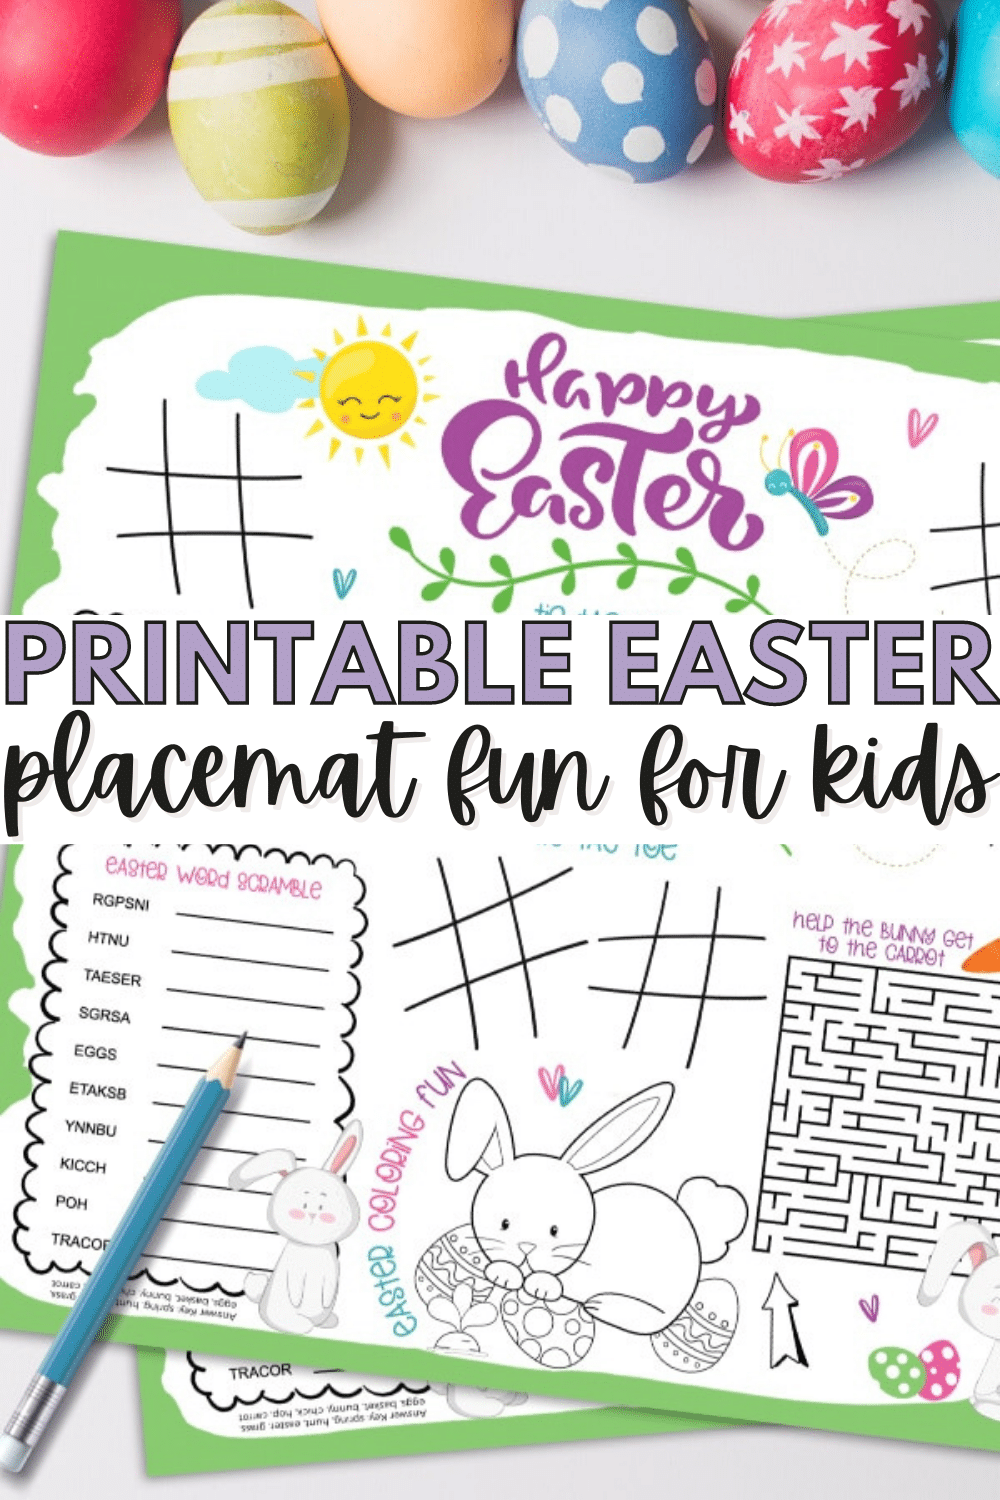 This free printable Easter placemat is perfect for the kids table at your Easter celebration. There are fun Easter activities, coloring and more for kids. #easter #printables #activitiesforkids via @wondermomwannab